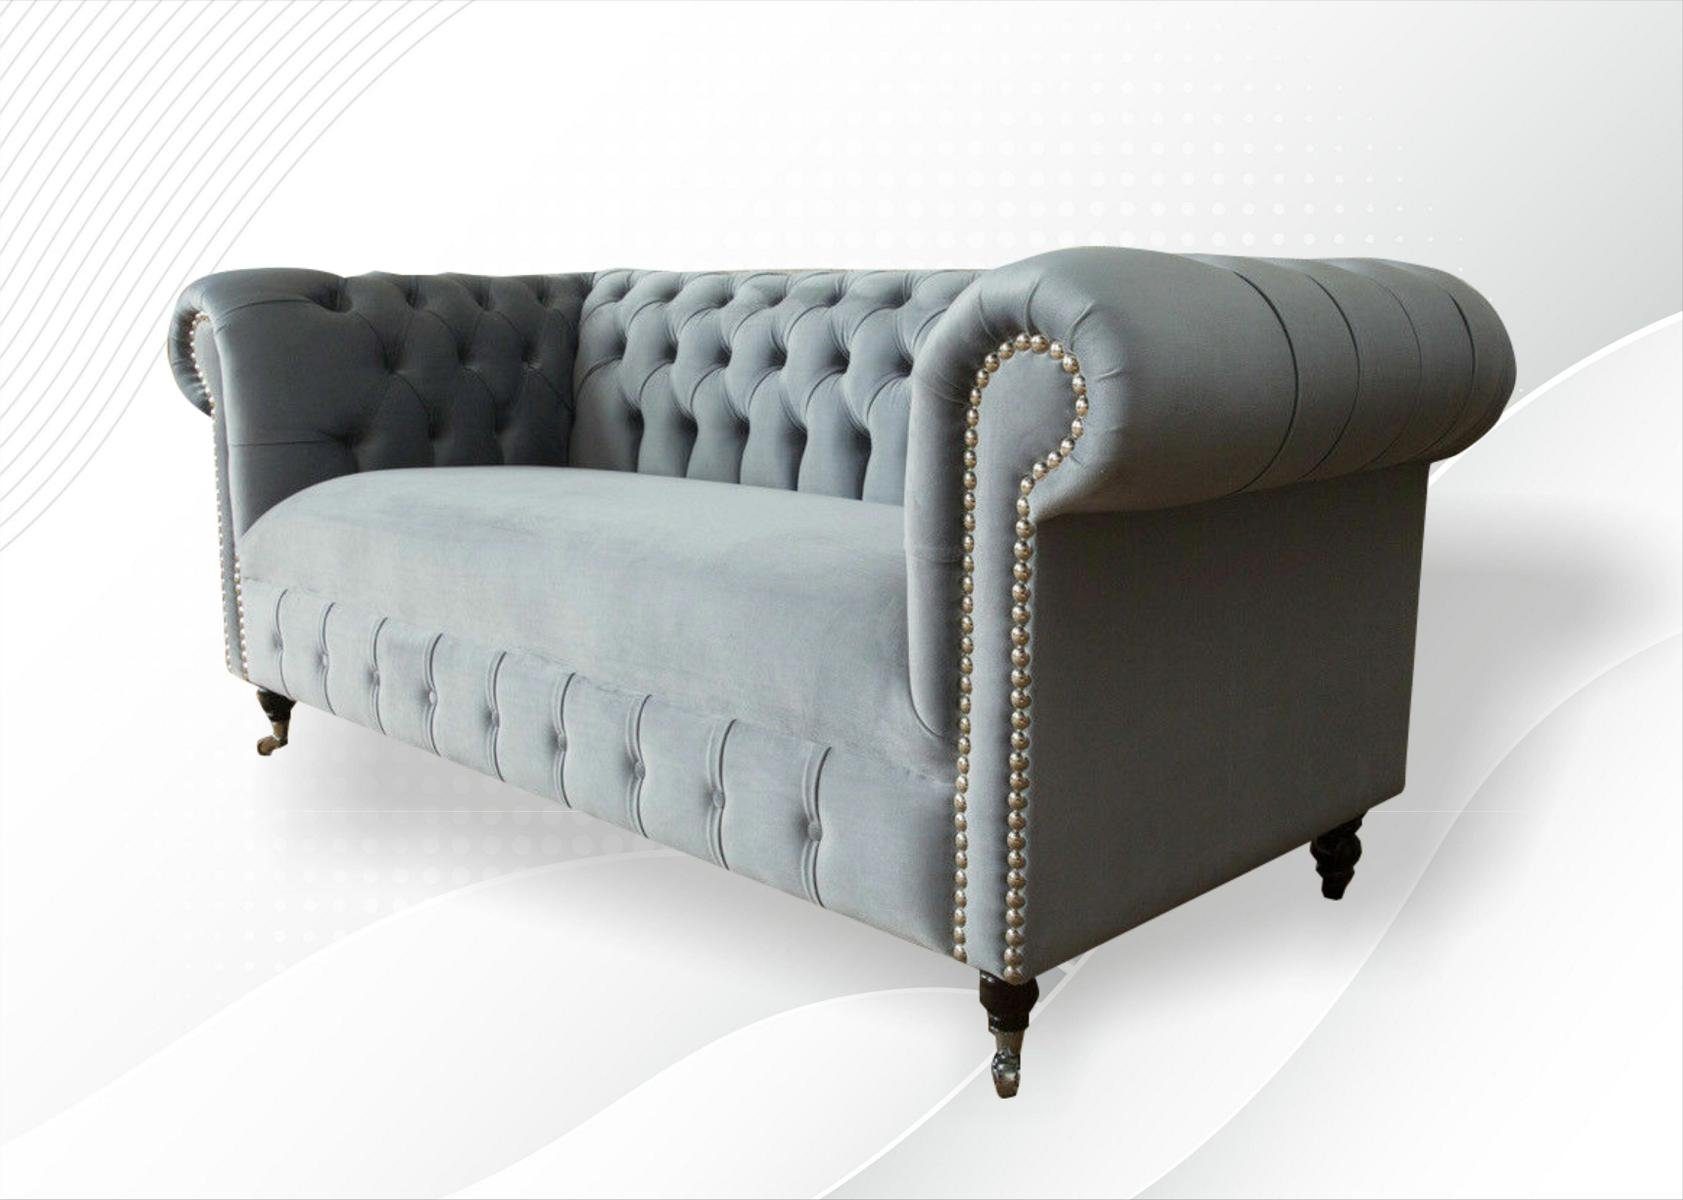 Textilmöbel, Couch Stoff Couchen Chesterfield Polster in Made Leder Sofa Europe JVmoebel Sofa